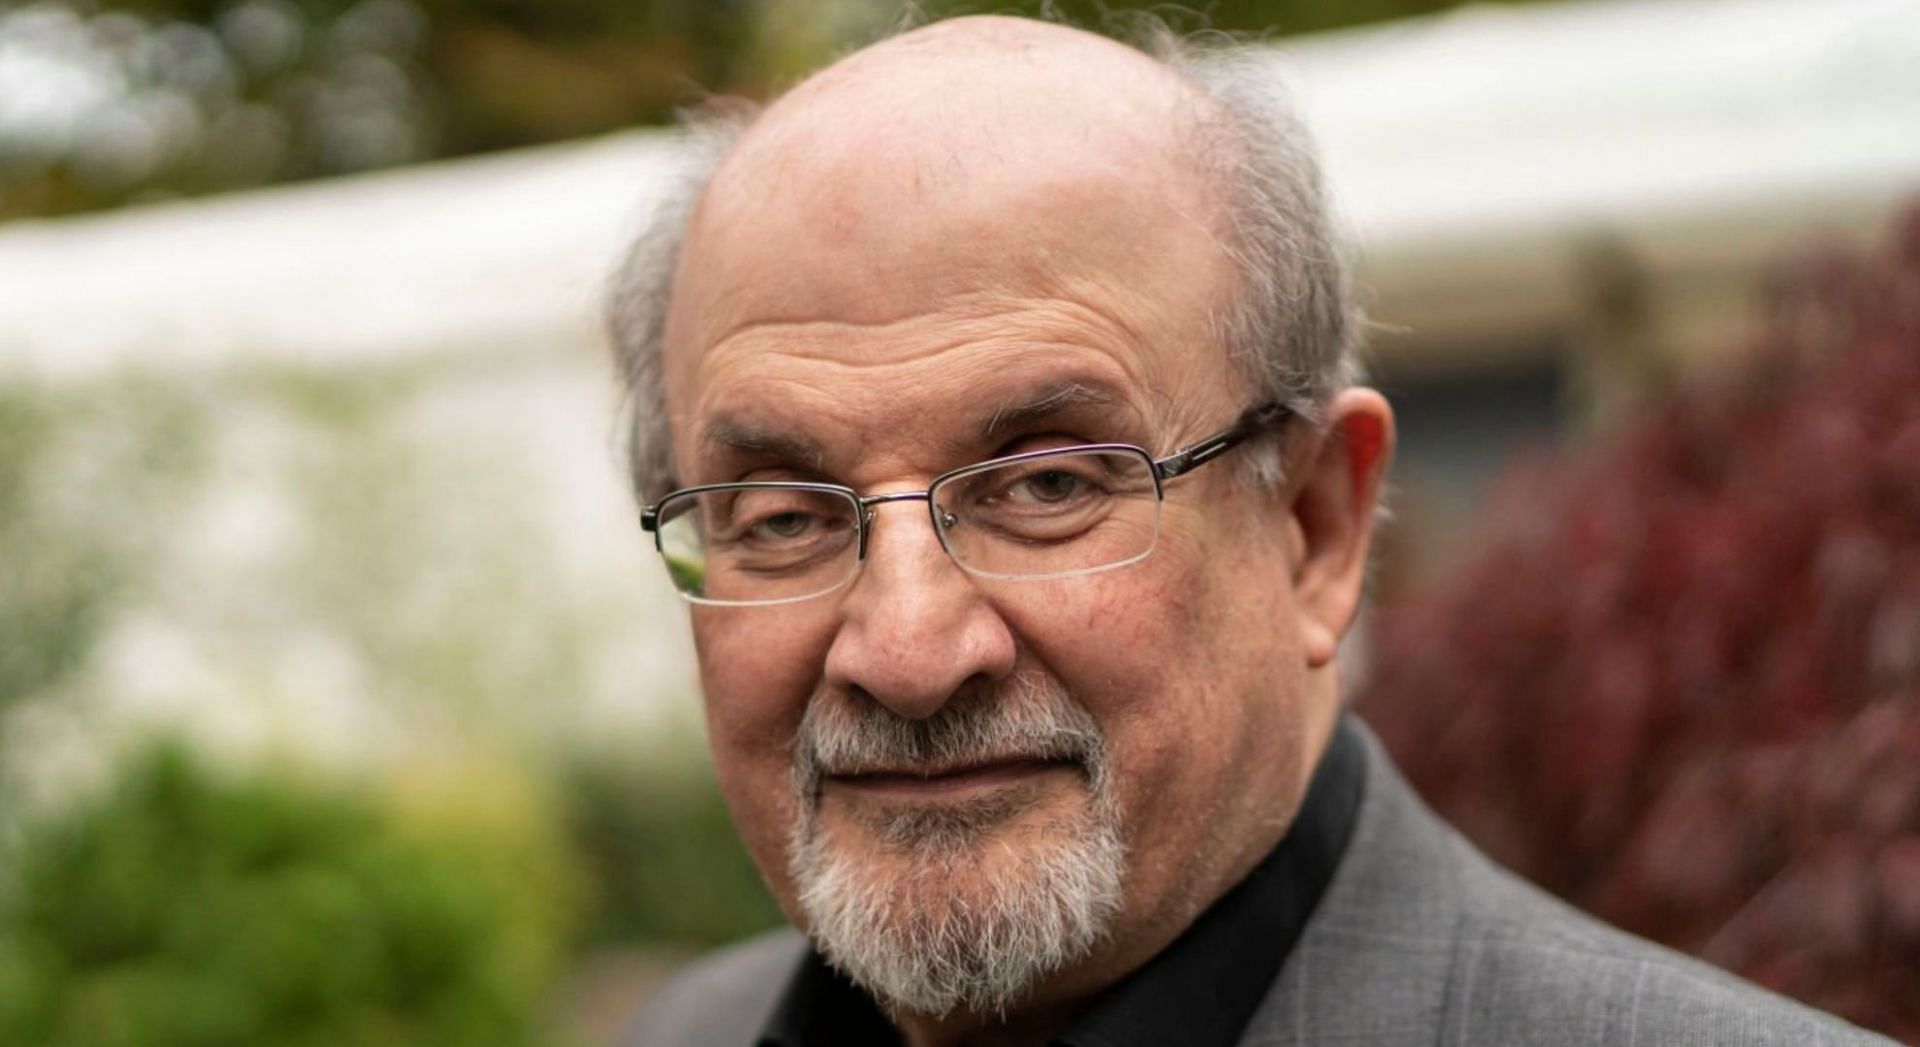 Novelist Salman Rushdie was stabbed onstage during an event at New York&#039;s Chautauqua Institution (Image via Getty Images)